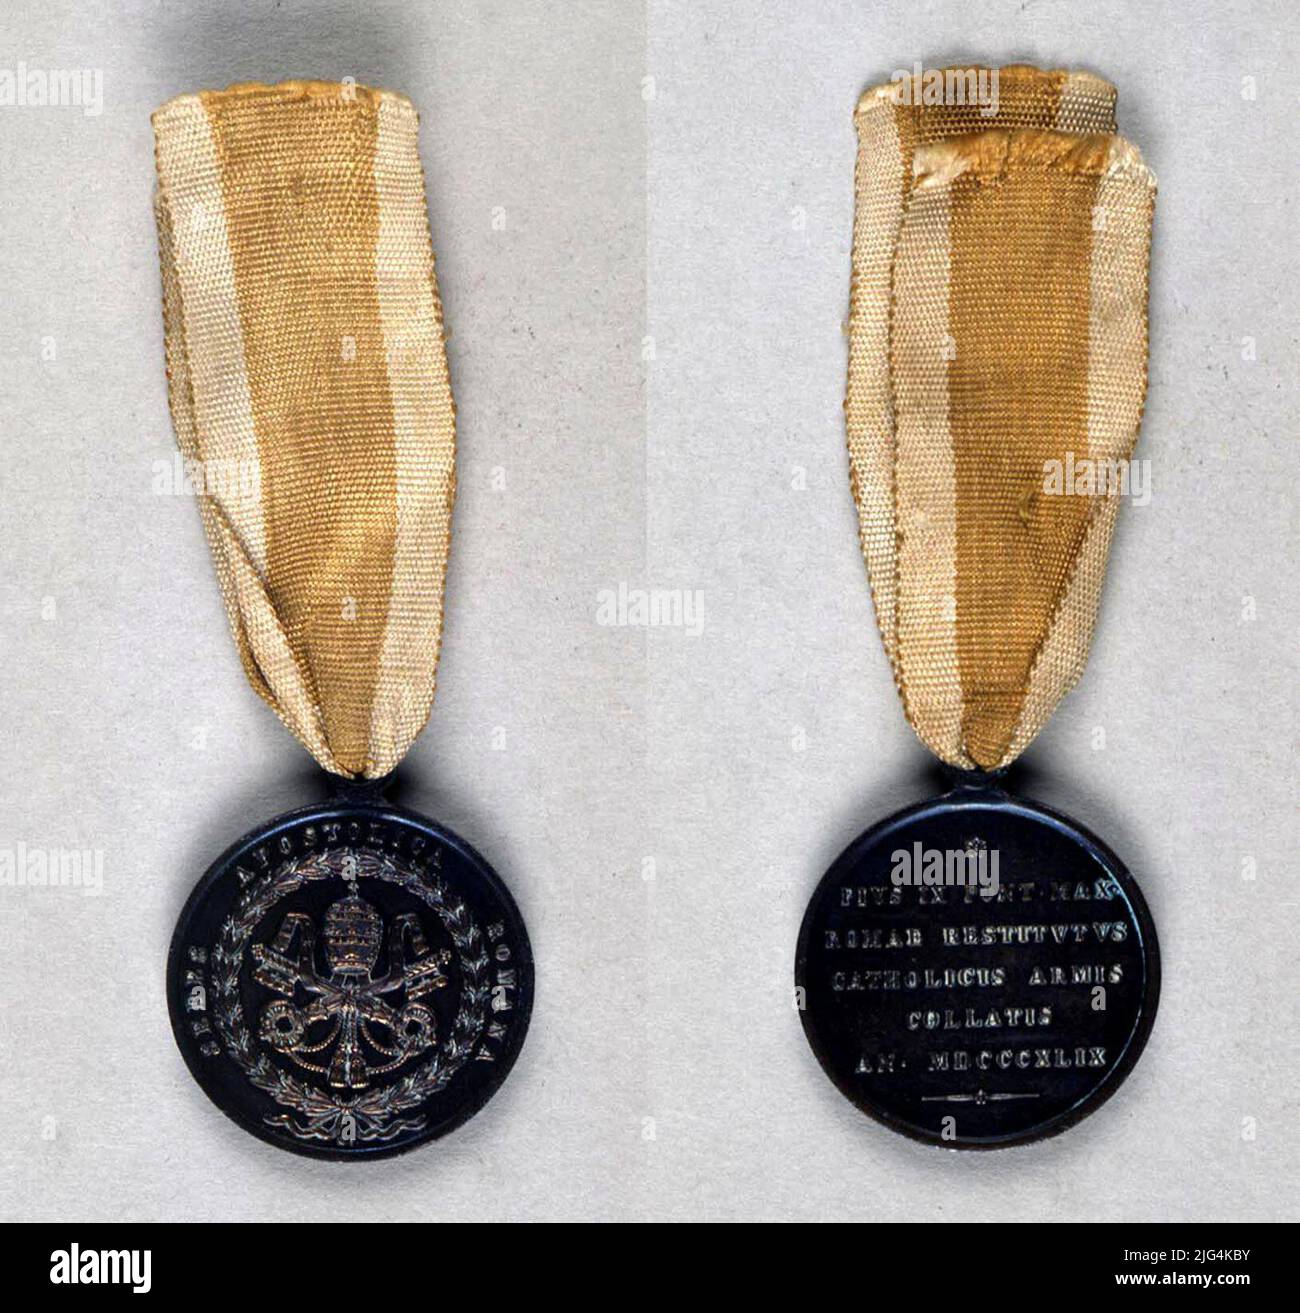 Commemorative medal of the expedition to Italy of 1849, Vatican. Commemorative Medal. Medal created by the Pontifical State, in categories of gold, silver and bronze to be granted as a distinction to the militias of Spain, Austria, France and Naples that with their intervention in Italy, made possible the return to Rome of S. Santity Pio Ix IX Circular form that is articulated by a solidarity hitch with it, located in its upper part, through which a yellow silk moaré tape passes with two white girdles, papacy symbols, located one to each side, of the which asss the medal. Circular, smooth and Stock Photo